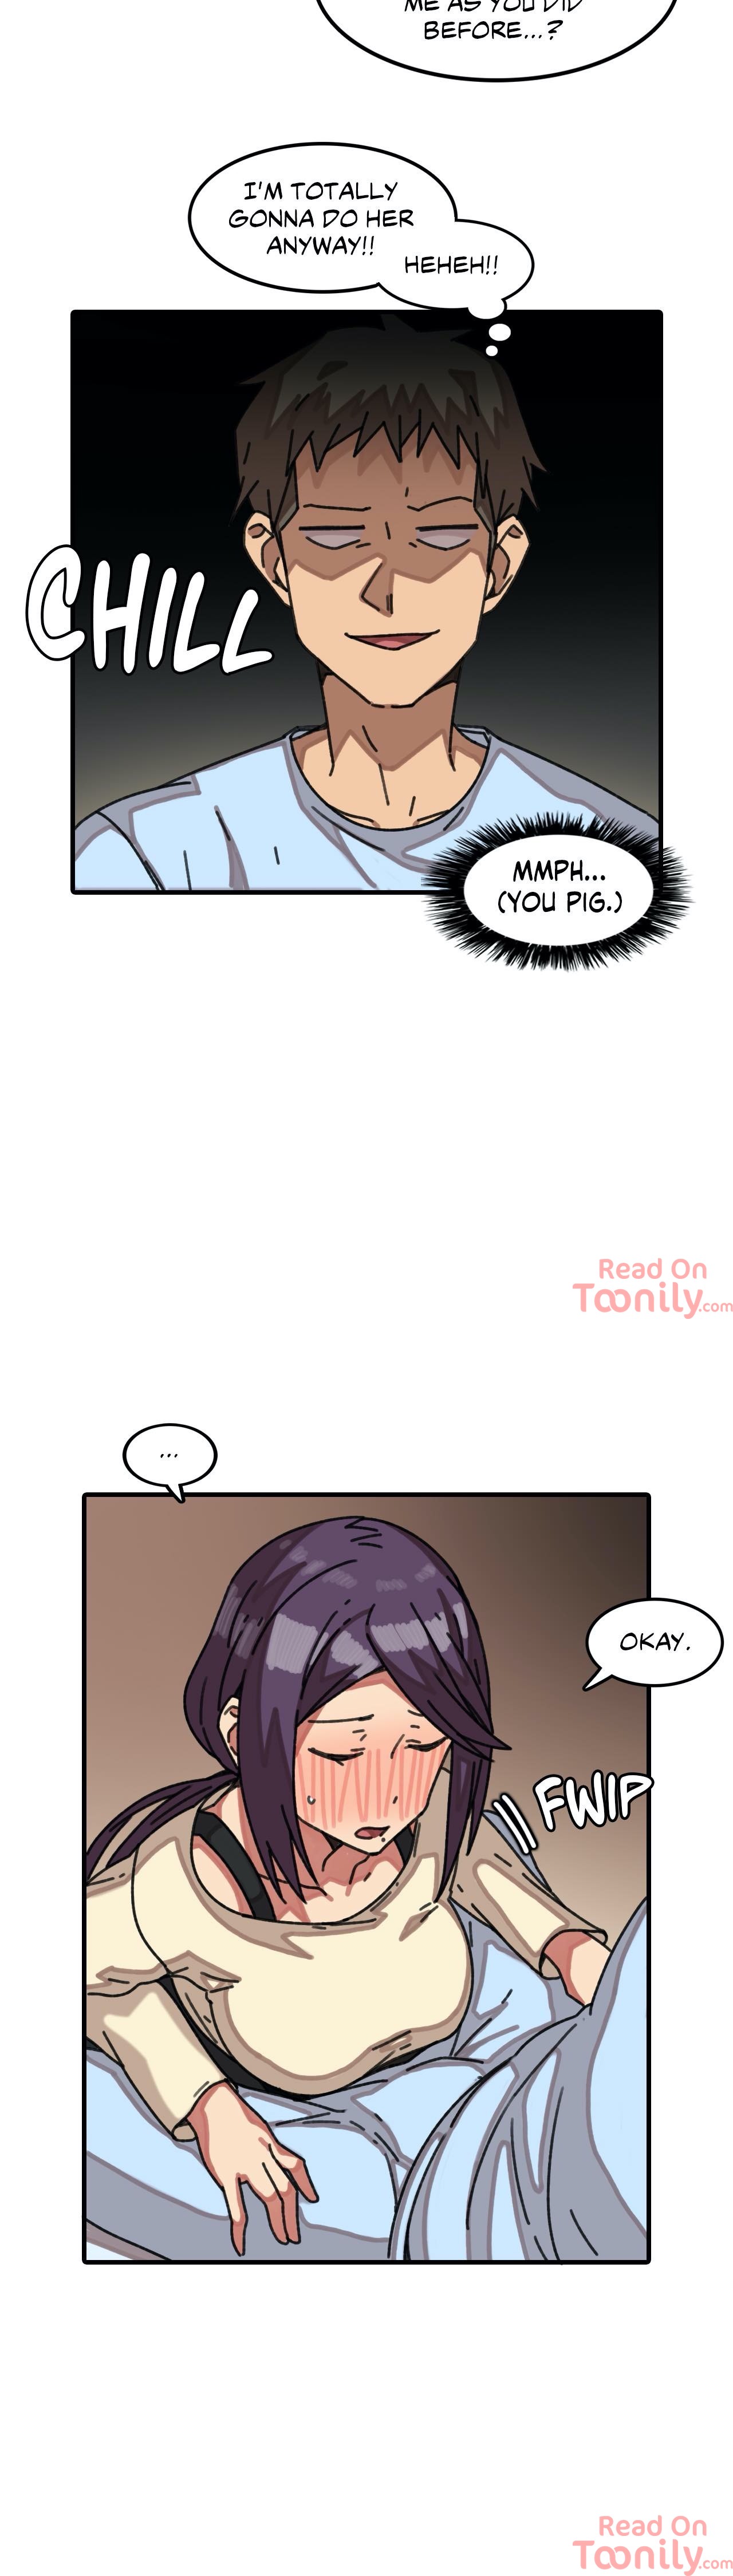 The Girl That Lingers in the Wall - Chapter 19 Page 4